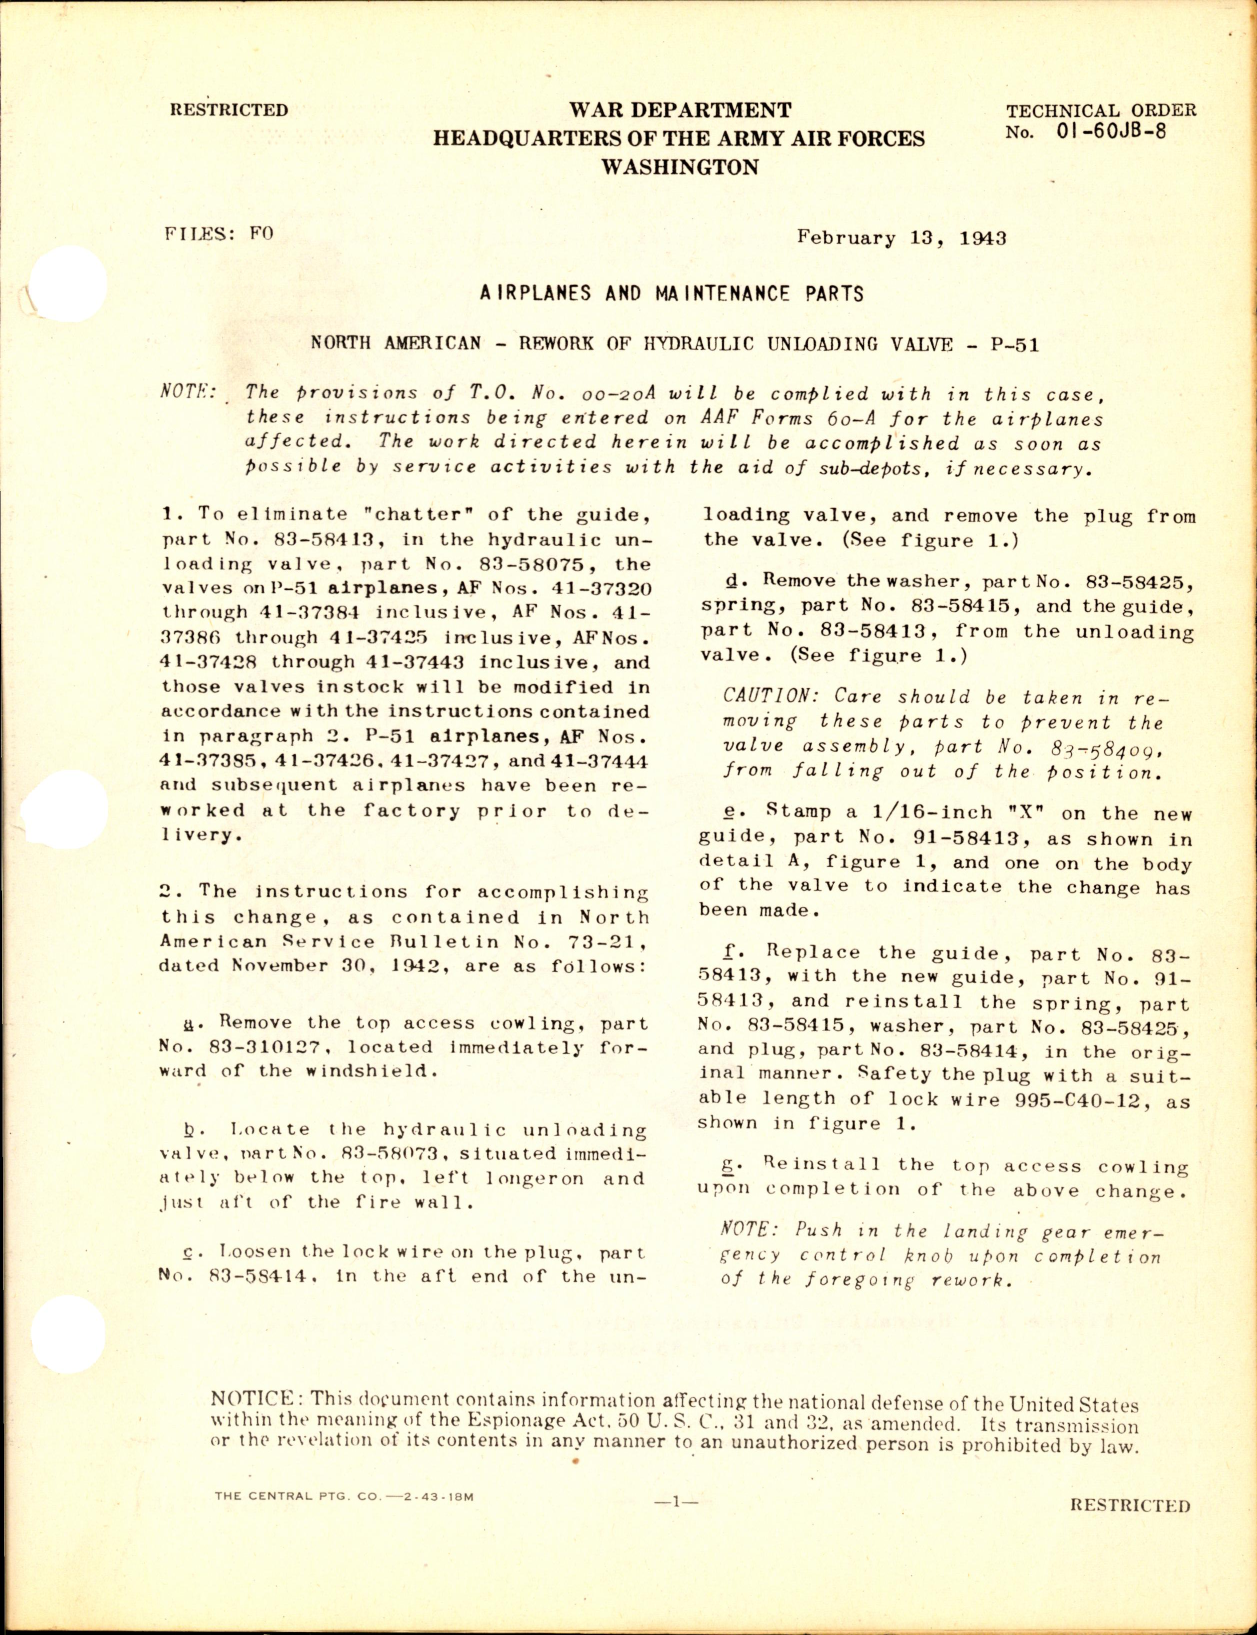 Sample page 1 from AirCorps Library document: Rework of Hydraulic Unloading Valve in the P-51